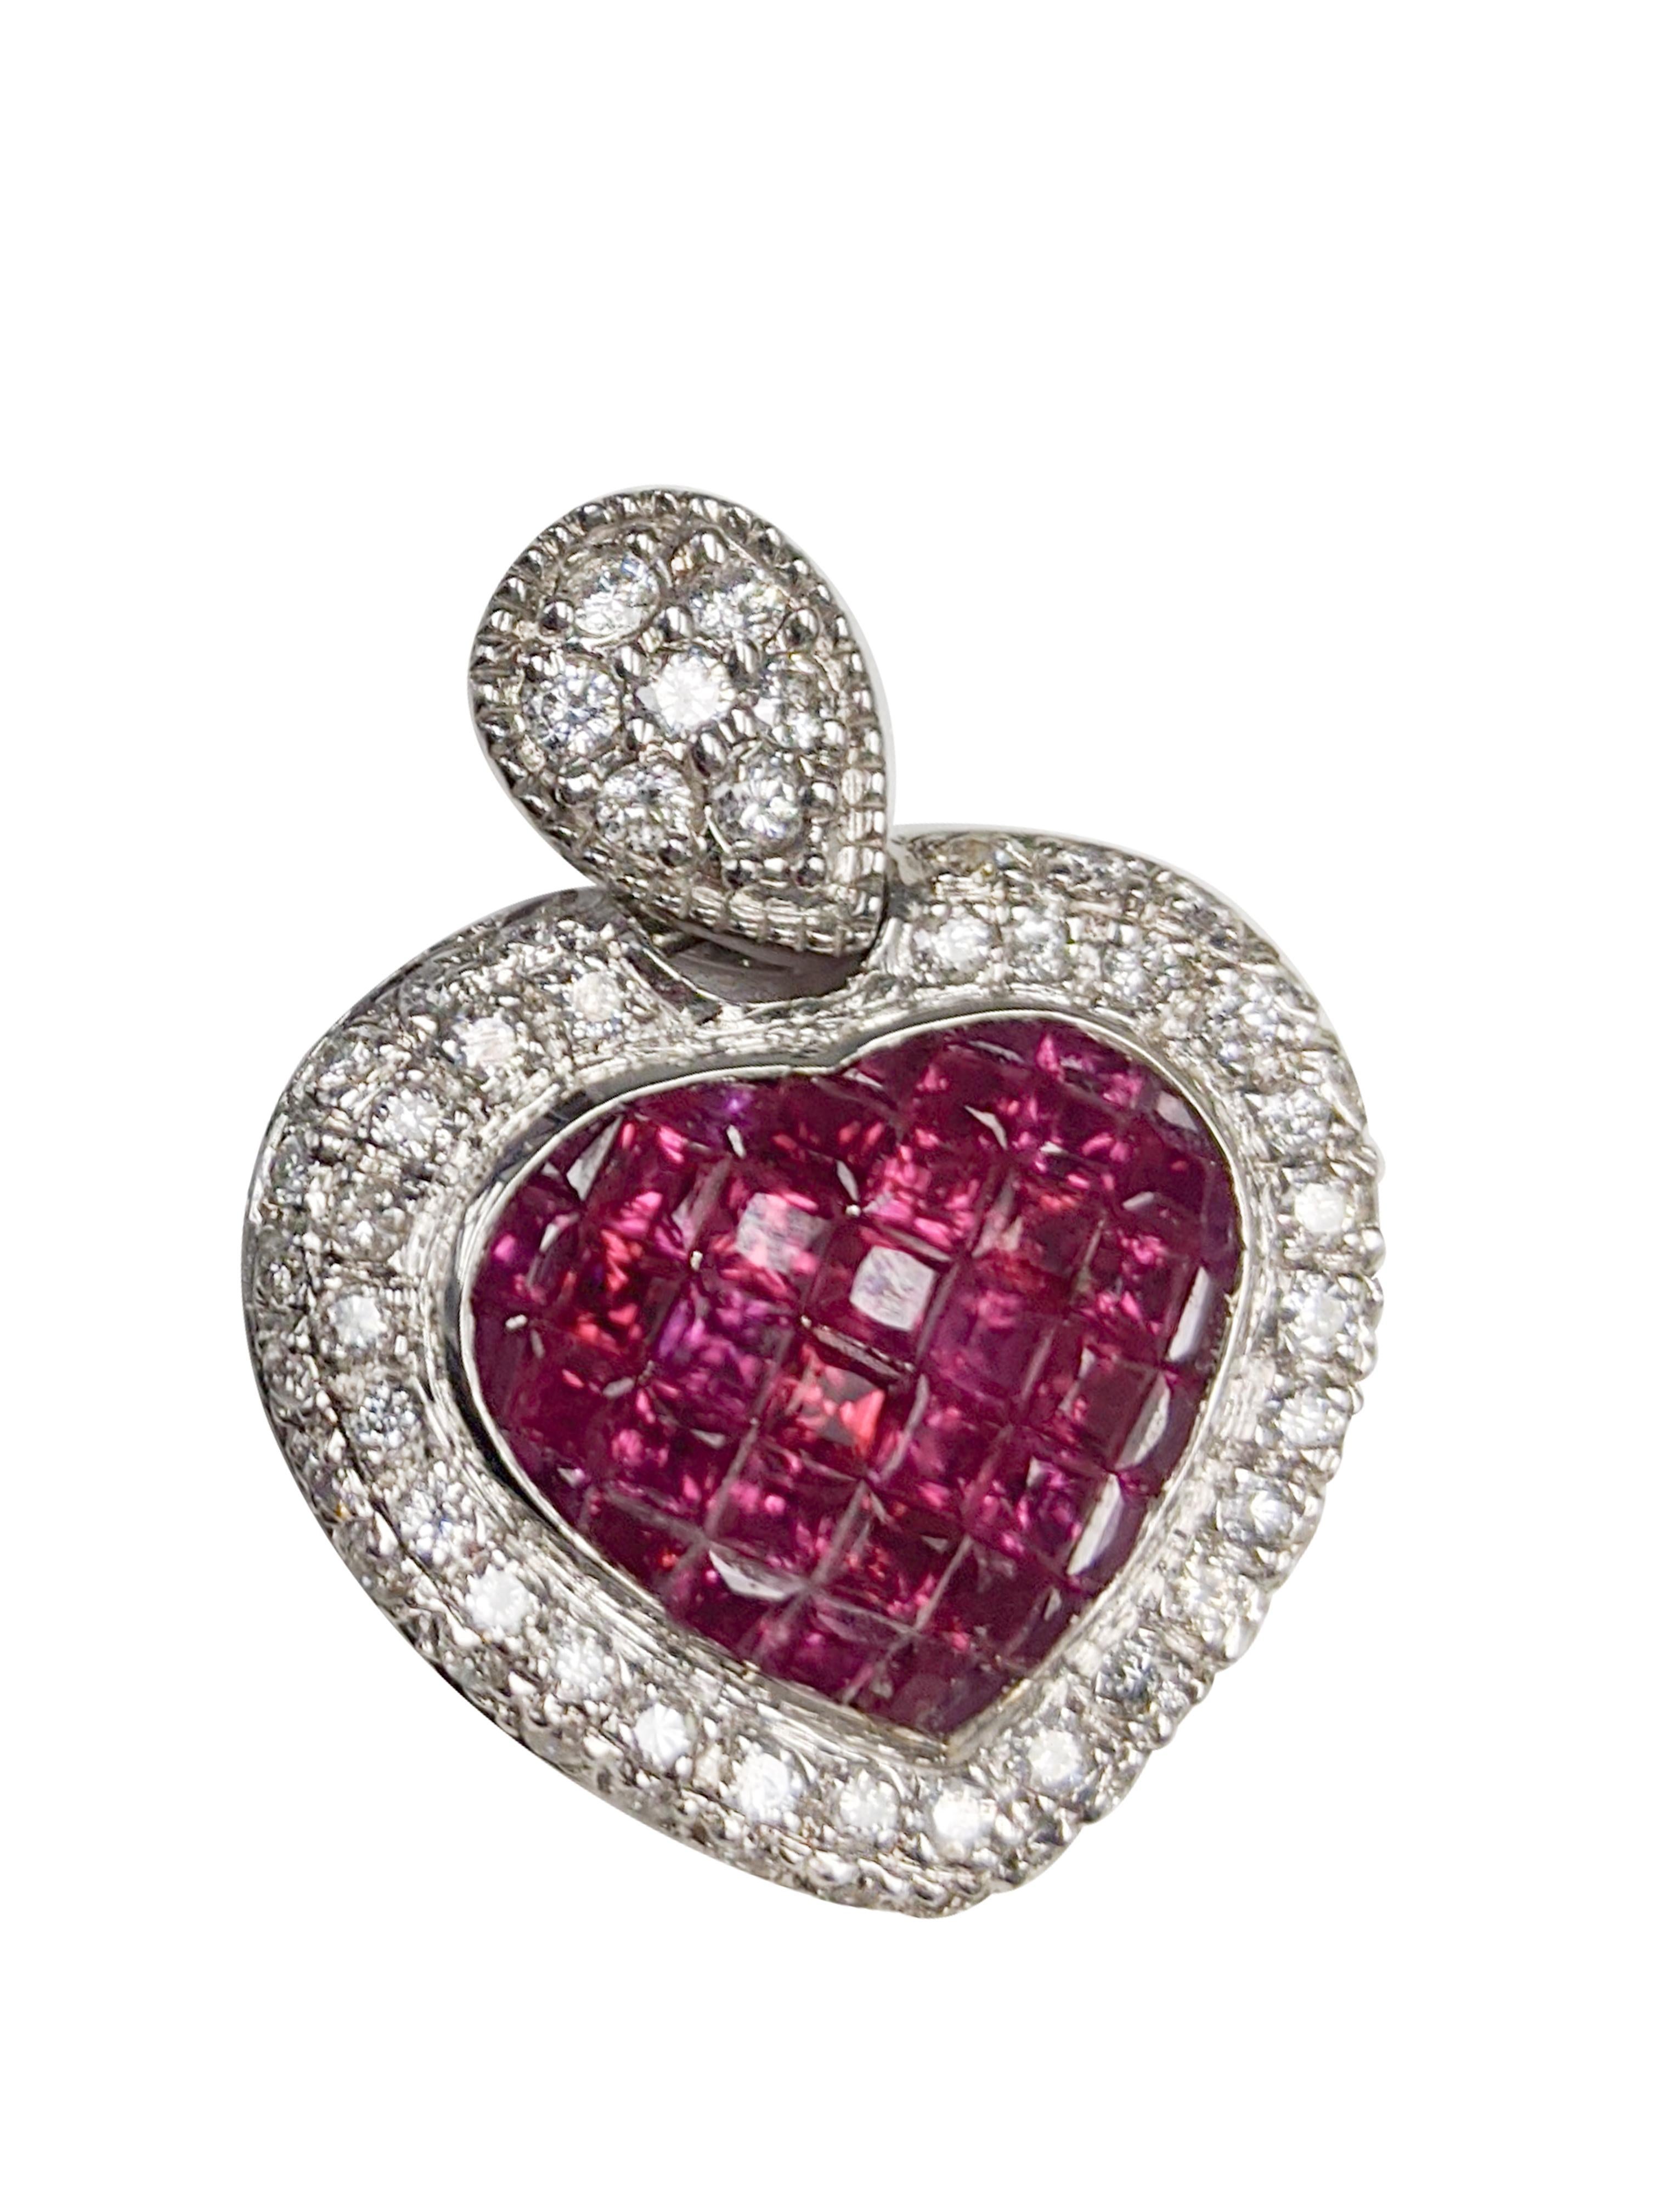 Romantic Ruby Heart-Shaped Pendant For Sale